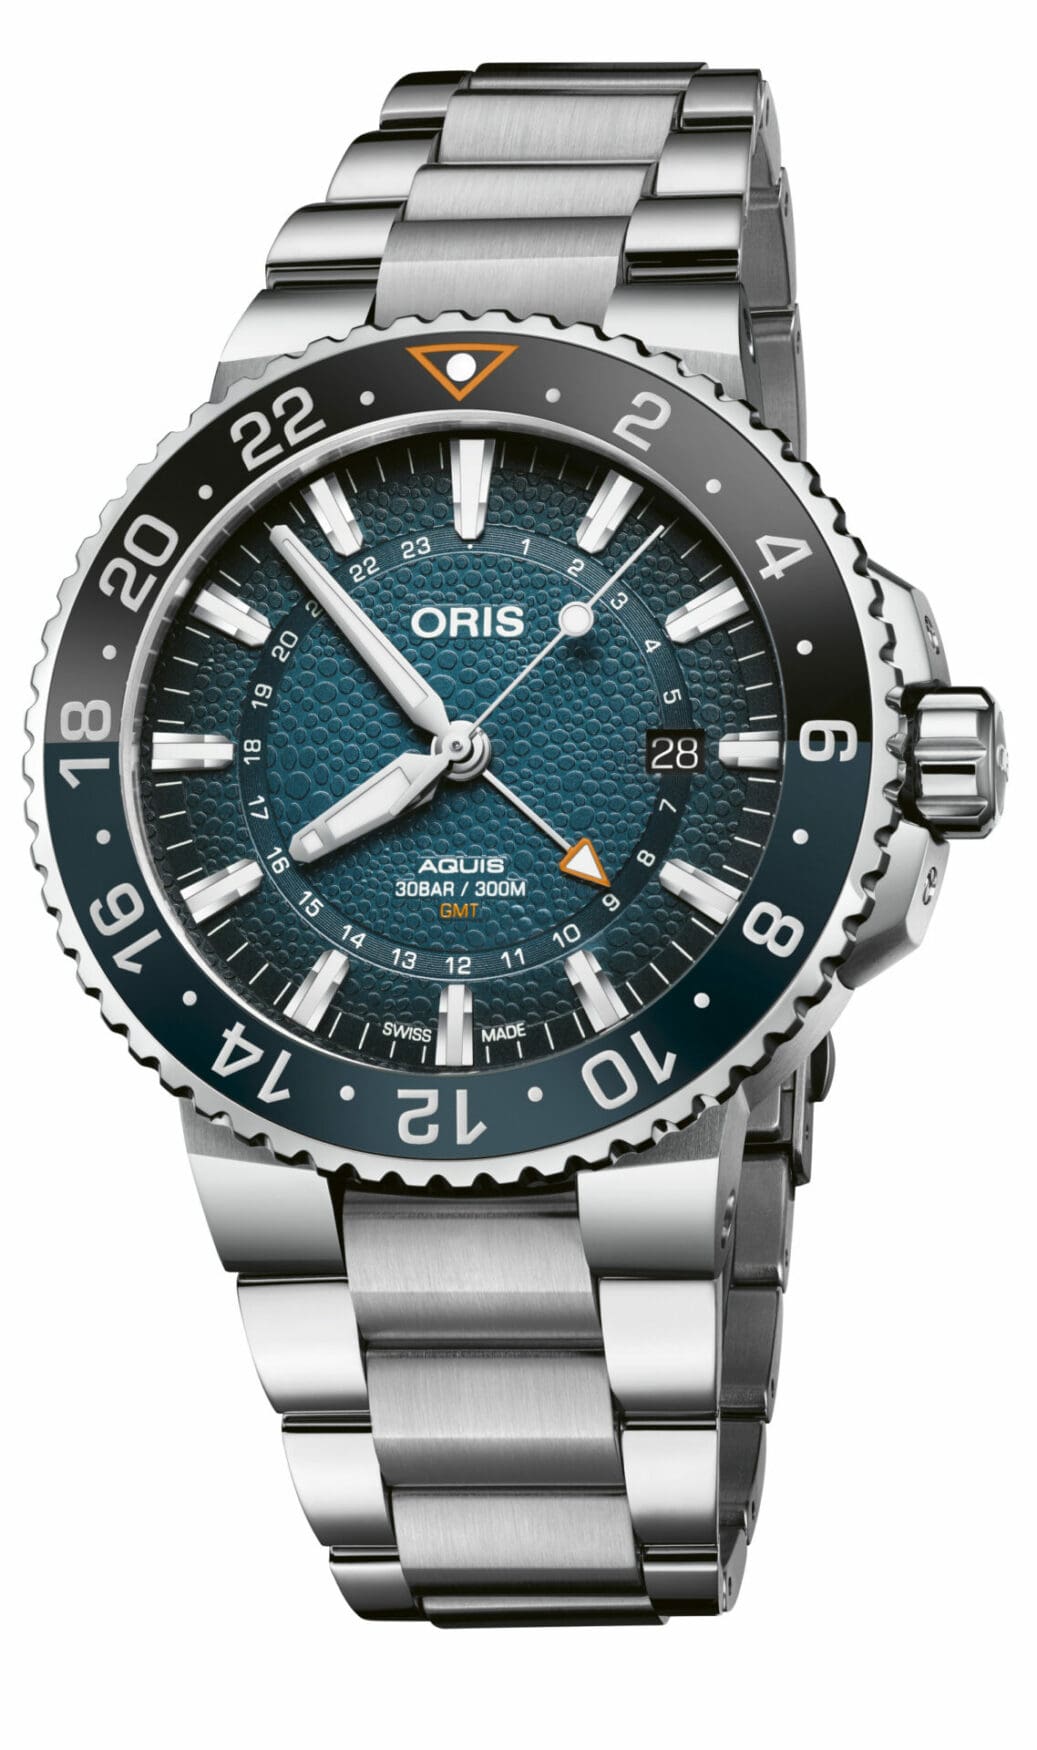 INTRODUCING: The Oris Whale Shark Aquis GMT has a textured dial with a bubbly personality